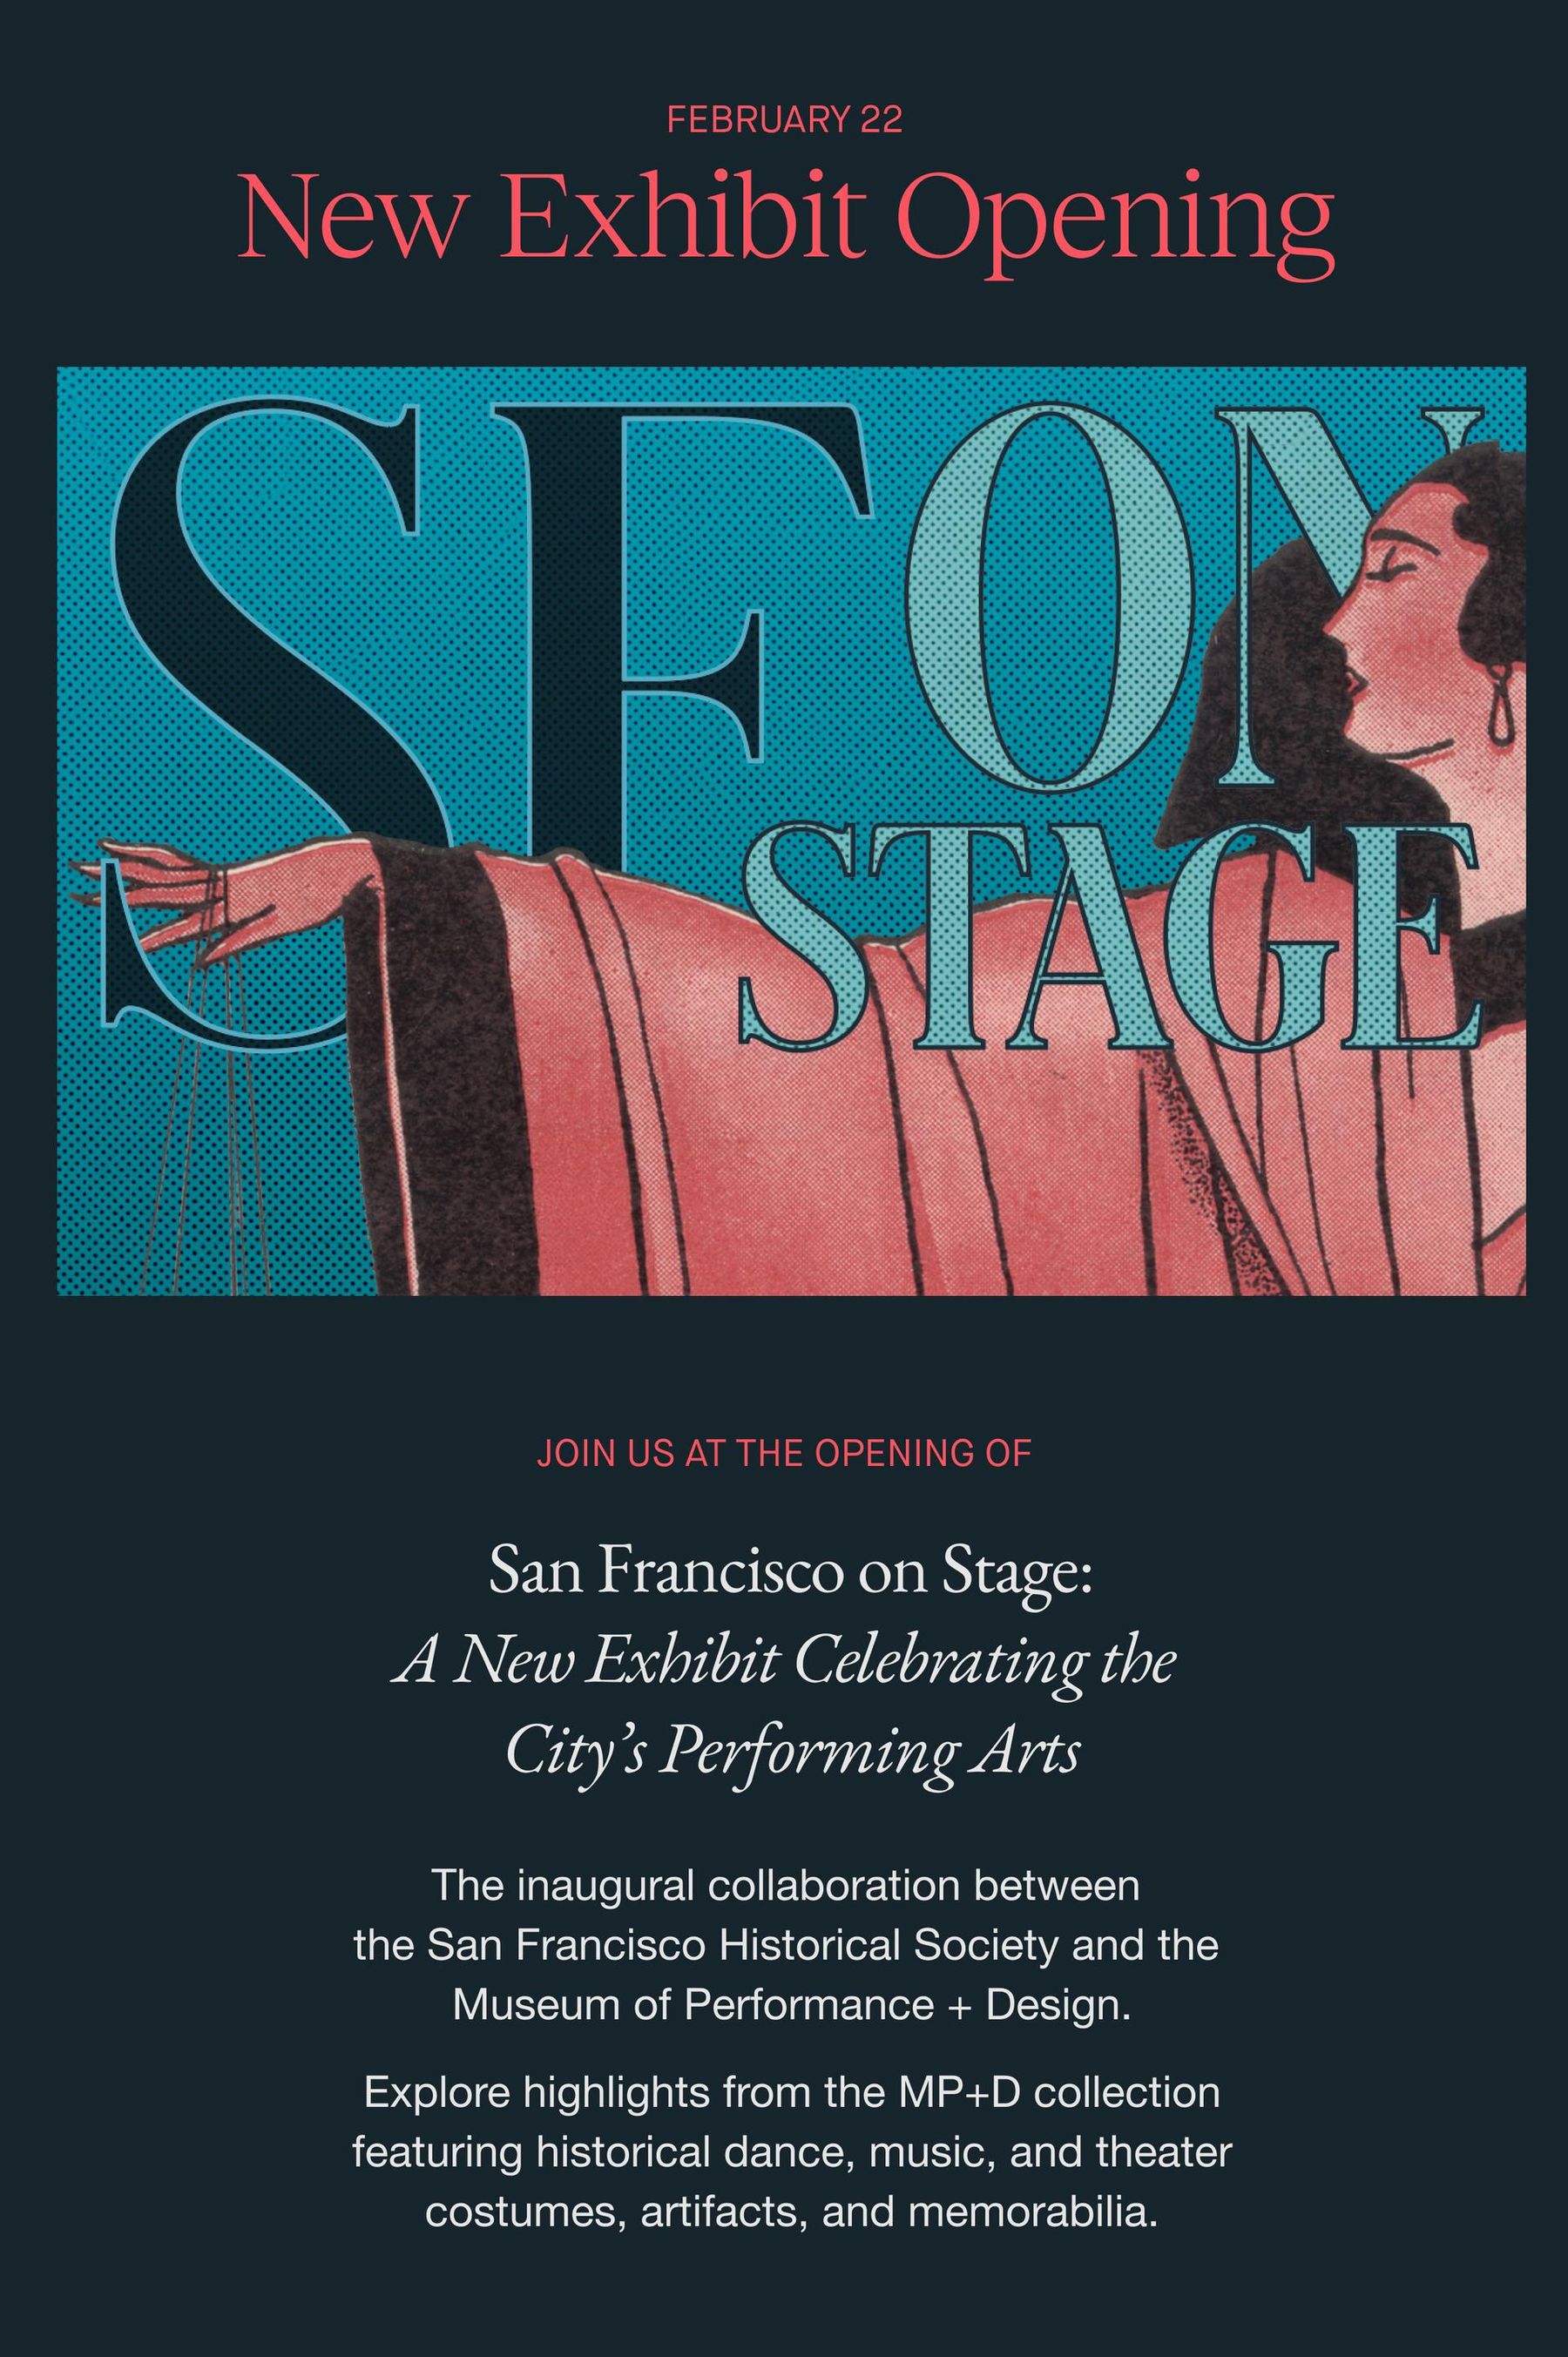 San Francisco on Stage: A New Exhibit Celebrating the City’s Performing Arts | Downtown San Francisco